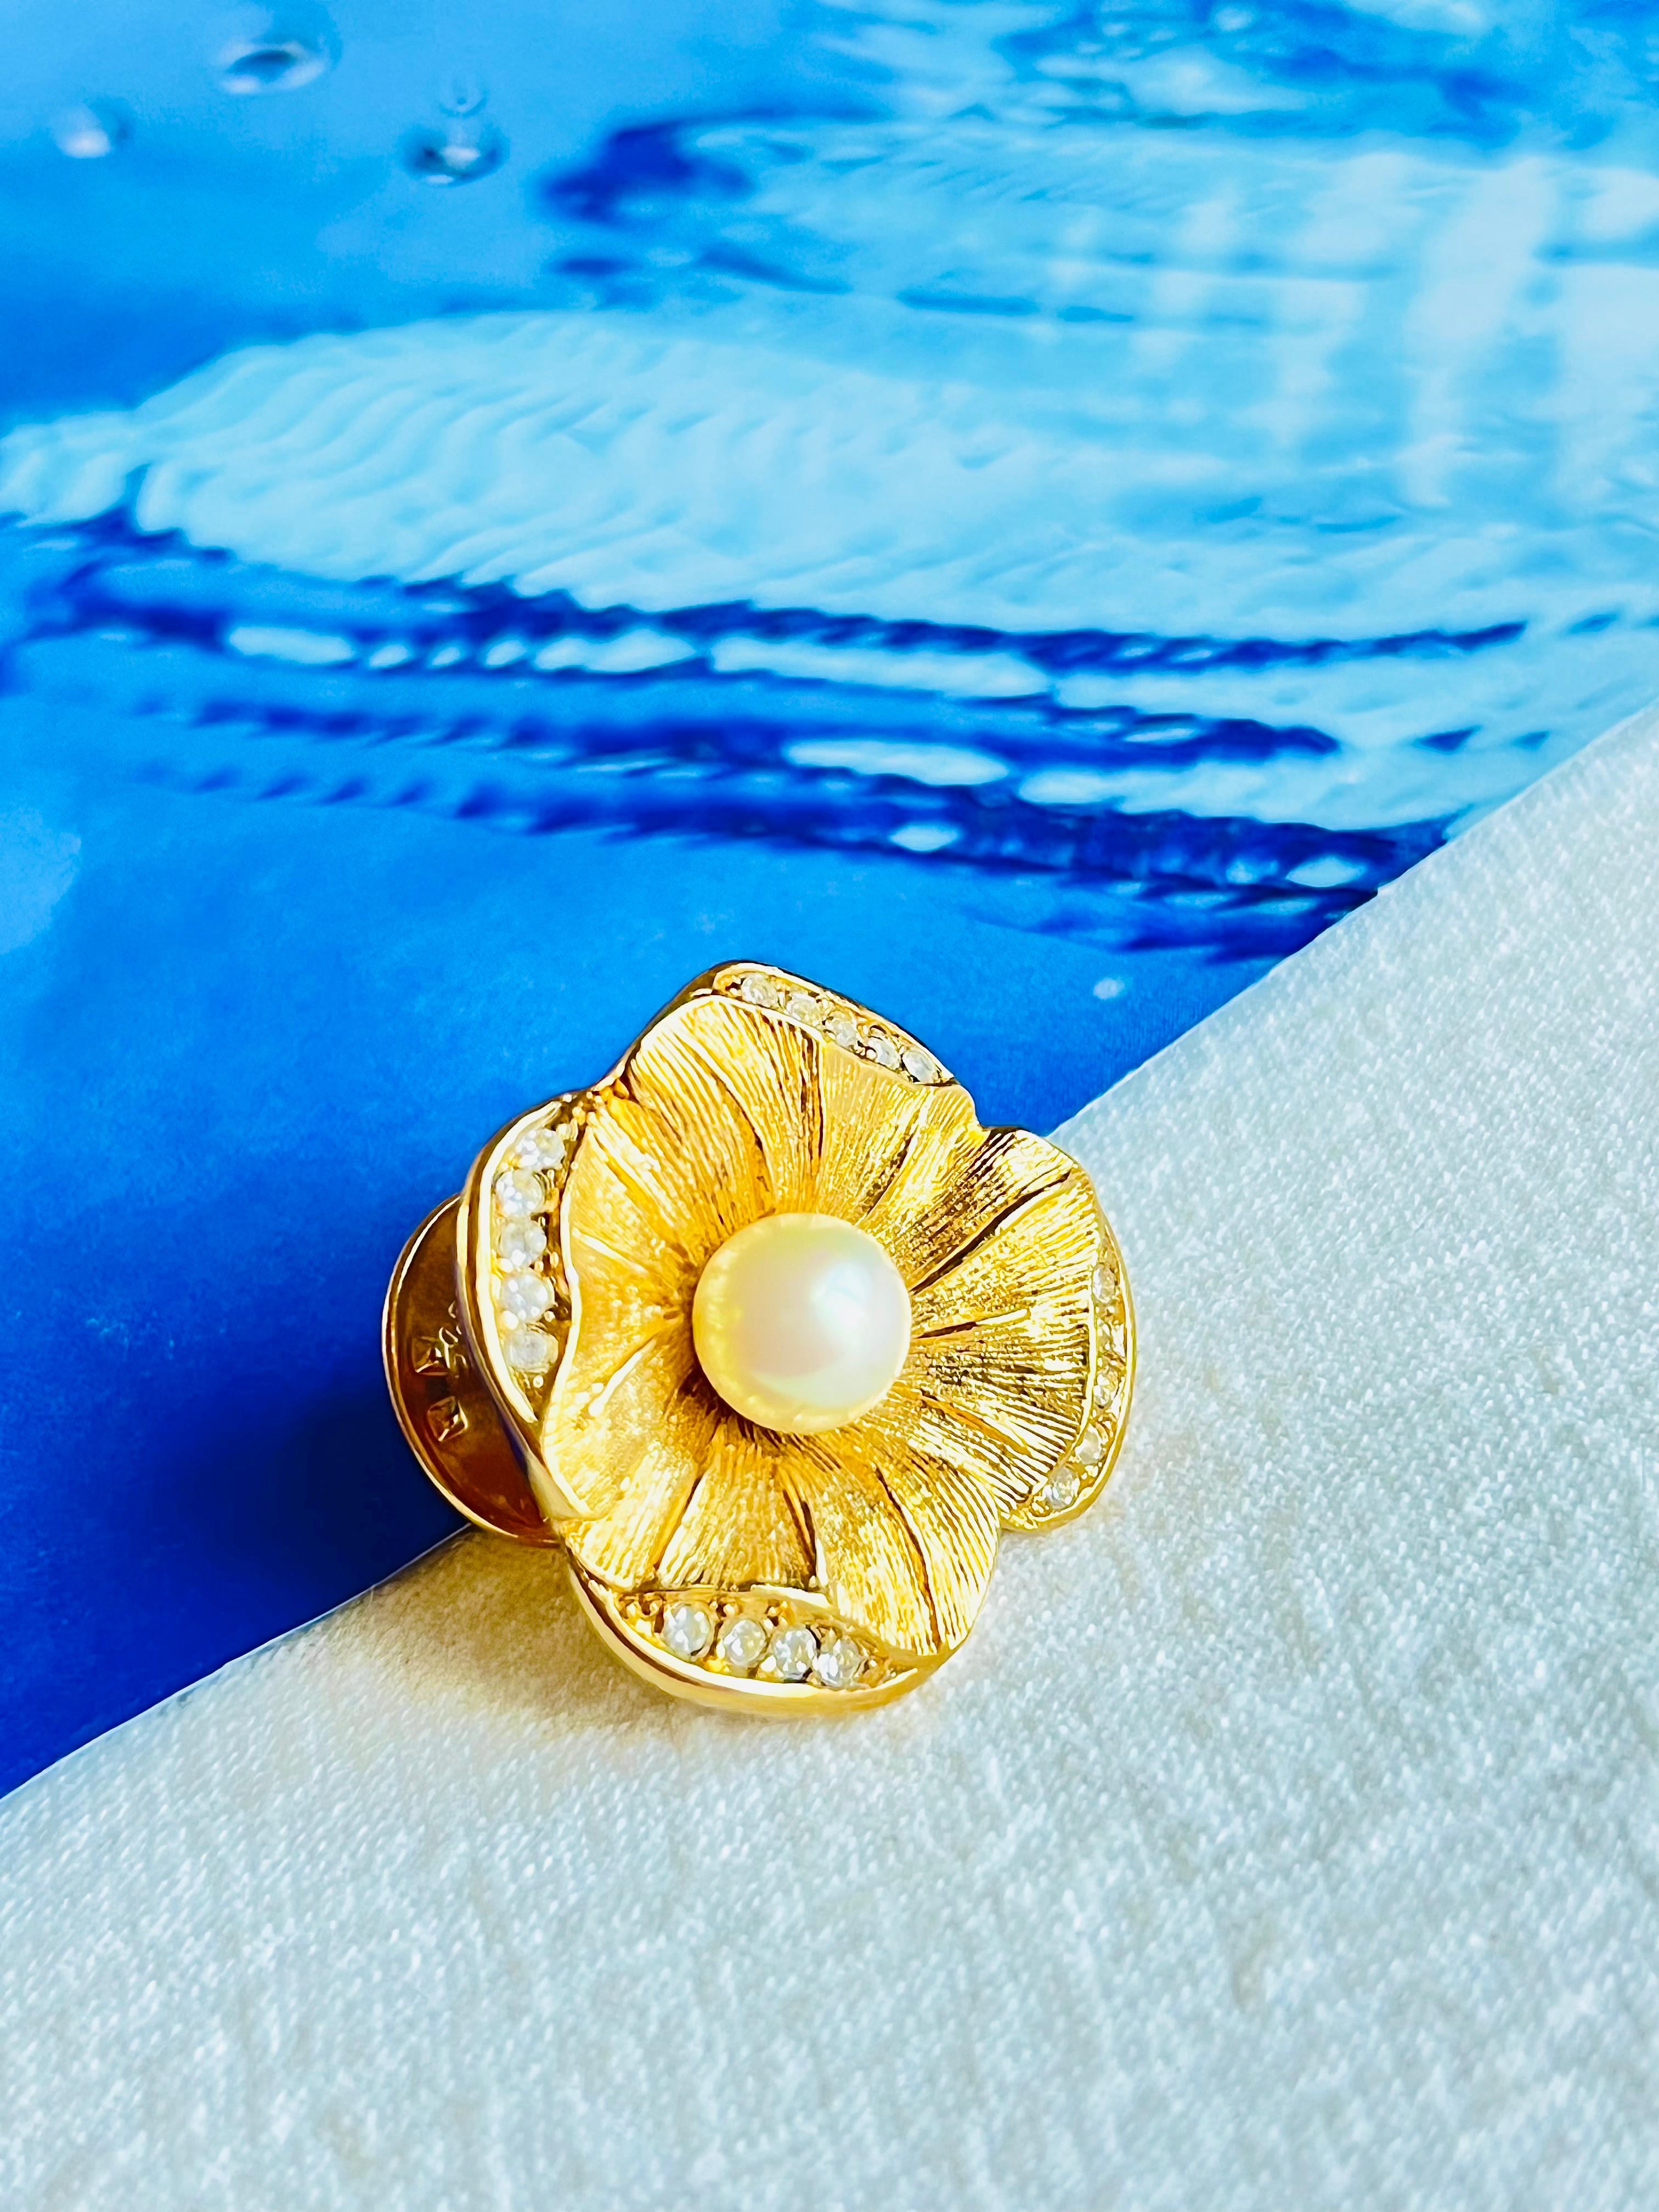 Very good condition. 100% genuine.

Very light scratches, barely noticeable.

A unique piece. This is gold plated stylised brooch.

Safety-catch pin closure.

Size: 2.4 cm x 2.4 cm.

Weight: 7.0 g.

_ _ _

Great for everyday wear. Come with velvet